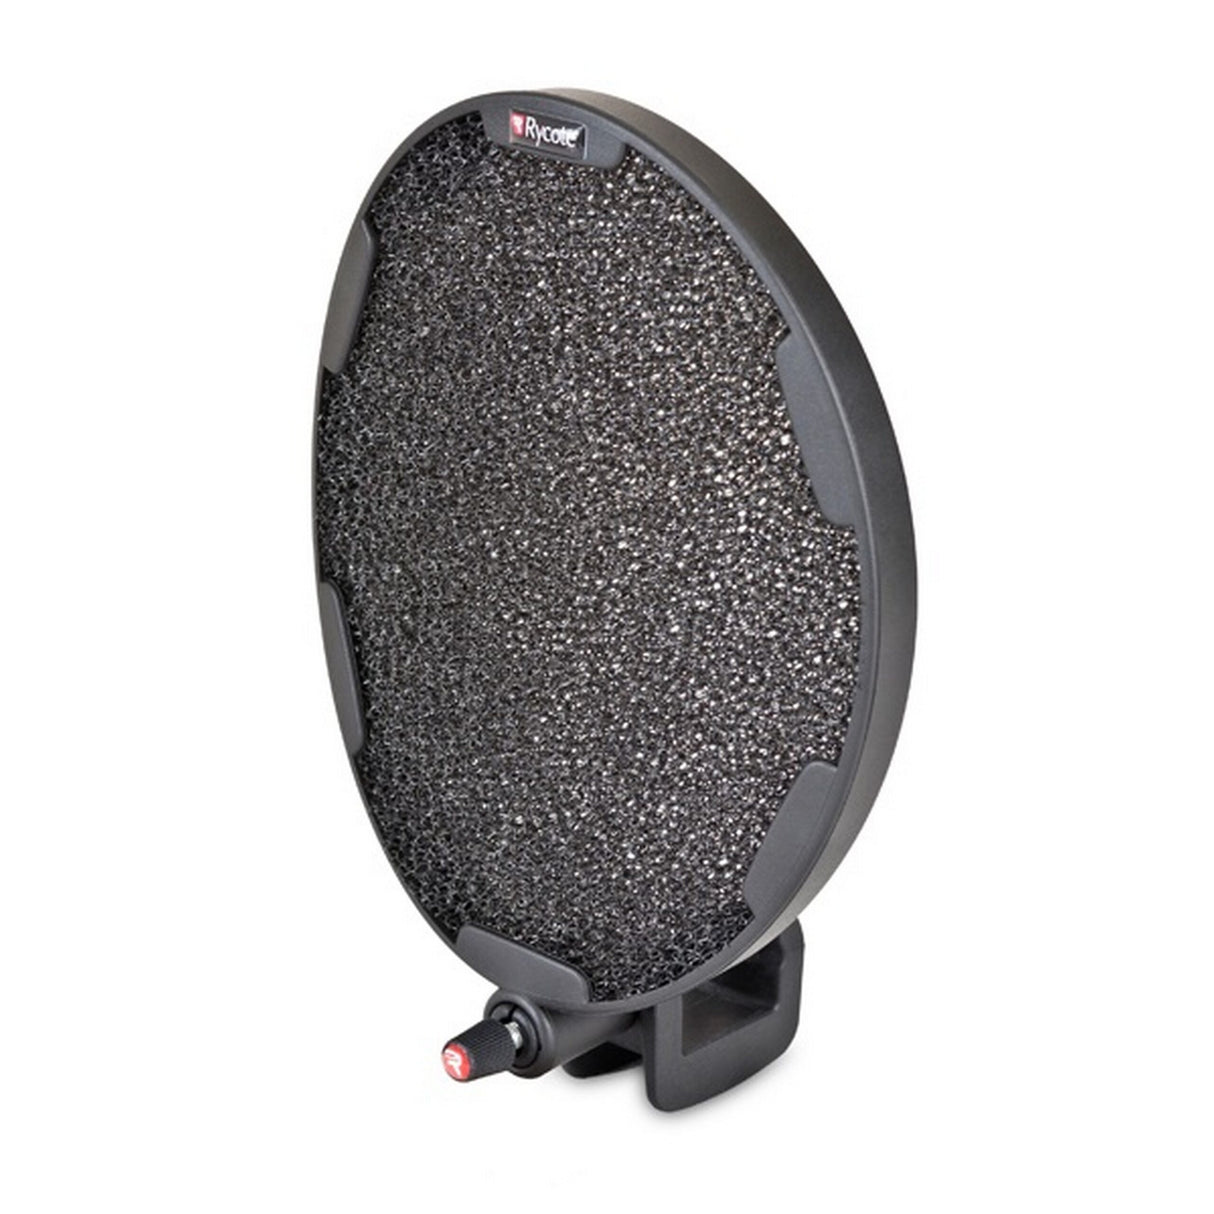 Rycote InVision Universal Pop Filter with Clamp, 6 Inch